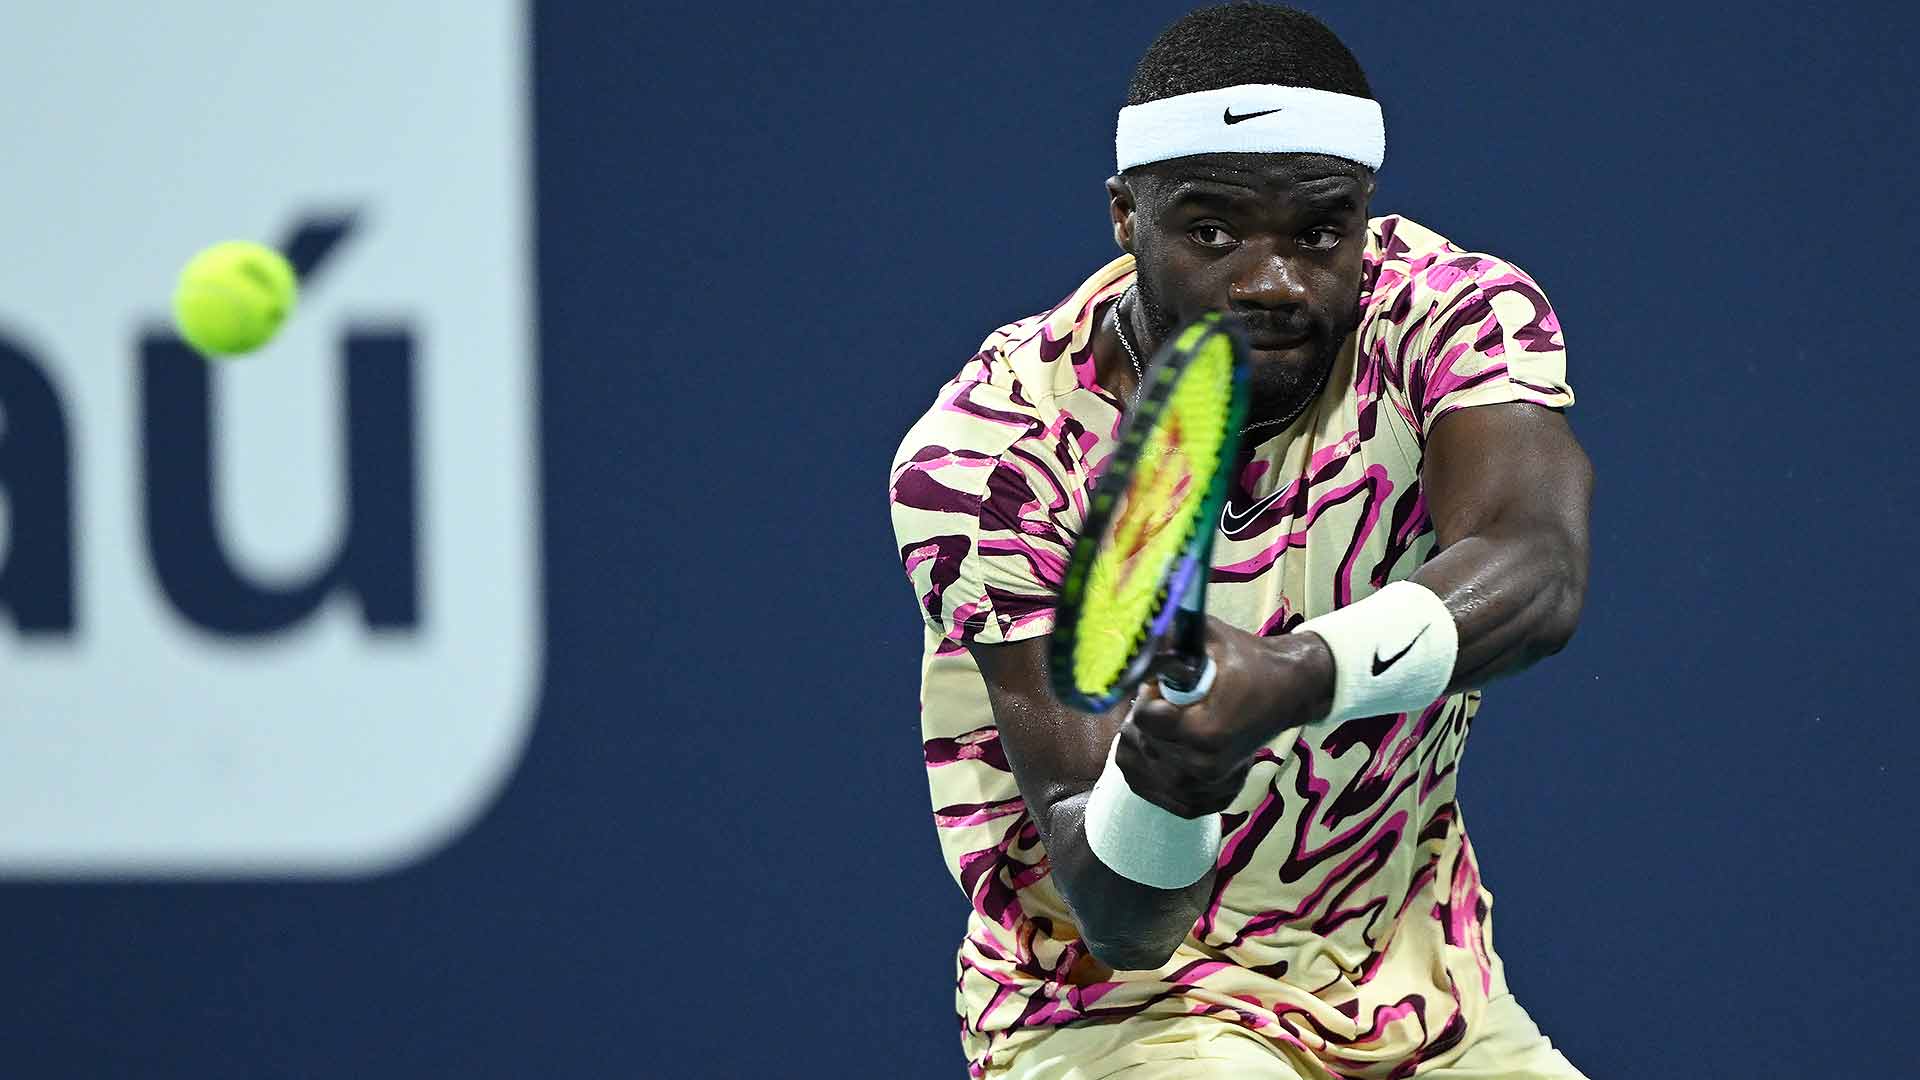 Frances Tiafoe withstands 55 winners from Yosuke Watanuki to advance in Miami.